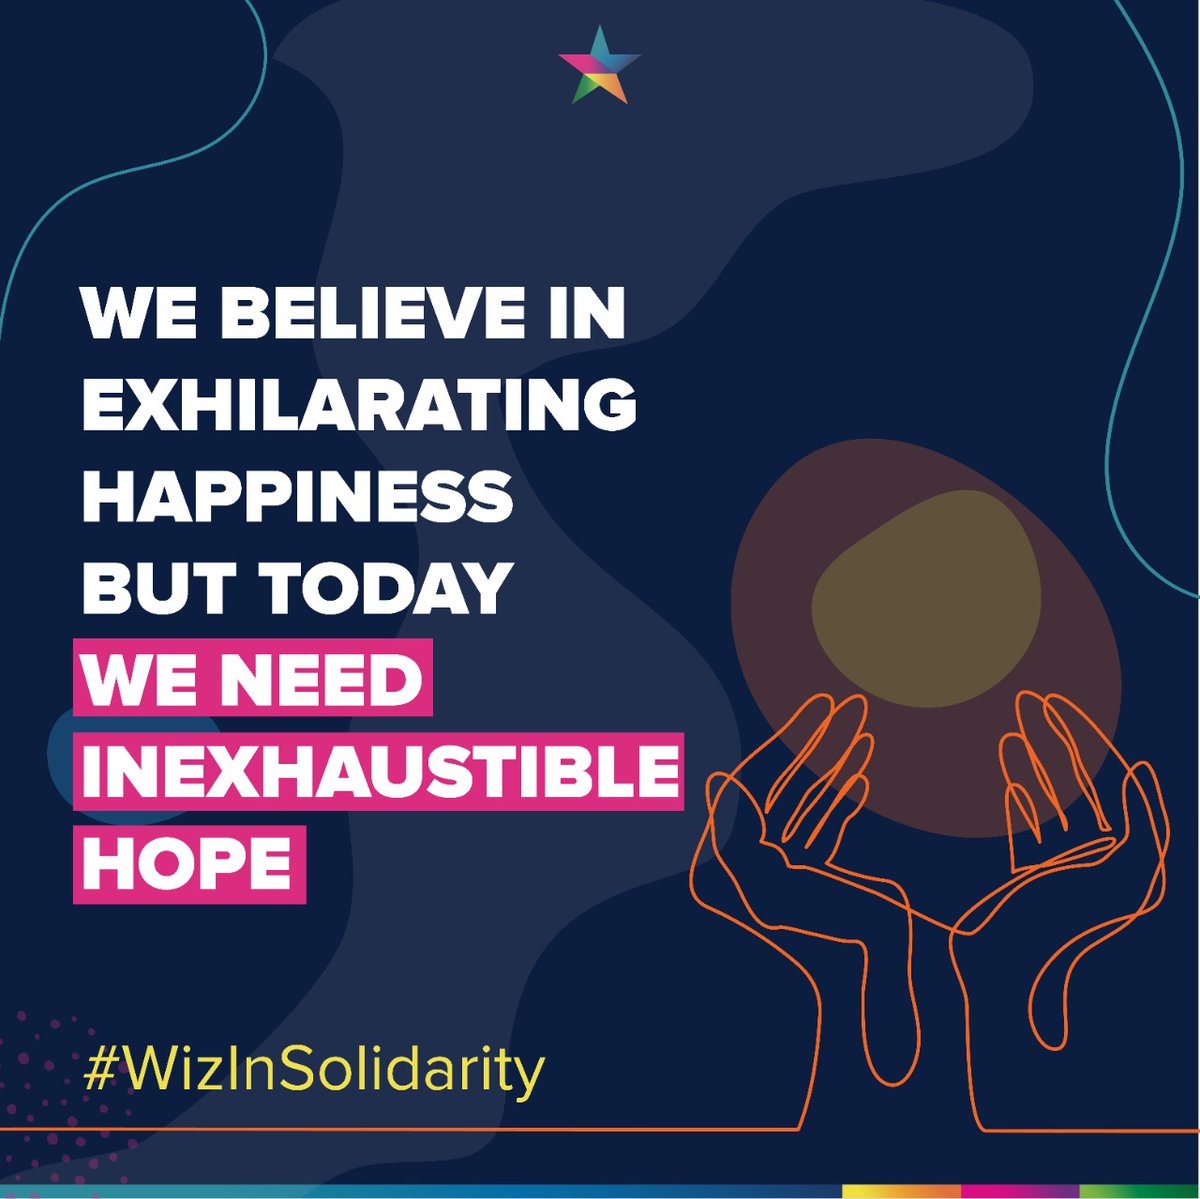 It’s been a while since we were surrounded with smiling faces but with an unceasing hope to see better days, we will get through this. #whatweneed is a strong belief and a resolve to support. #Wizcraft #IndiaFightsCorona #InThisTogether